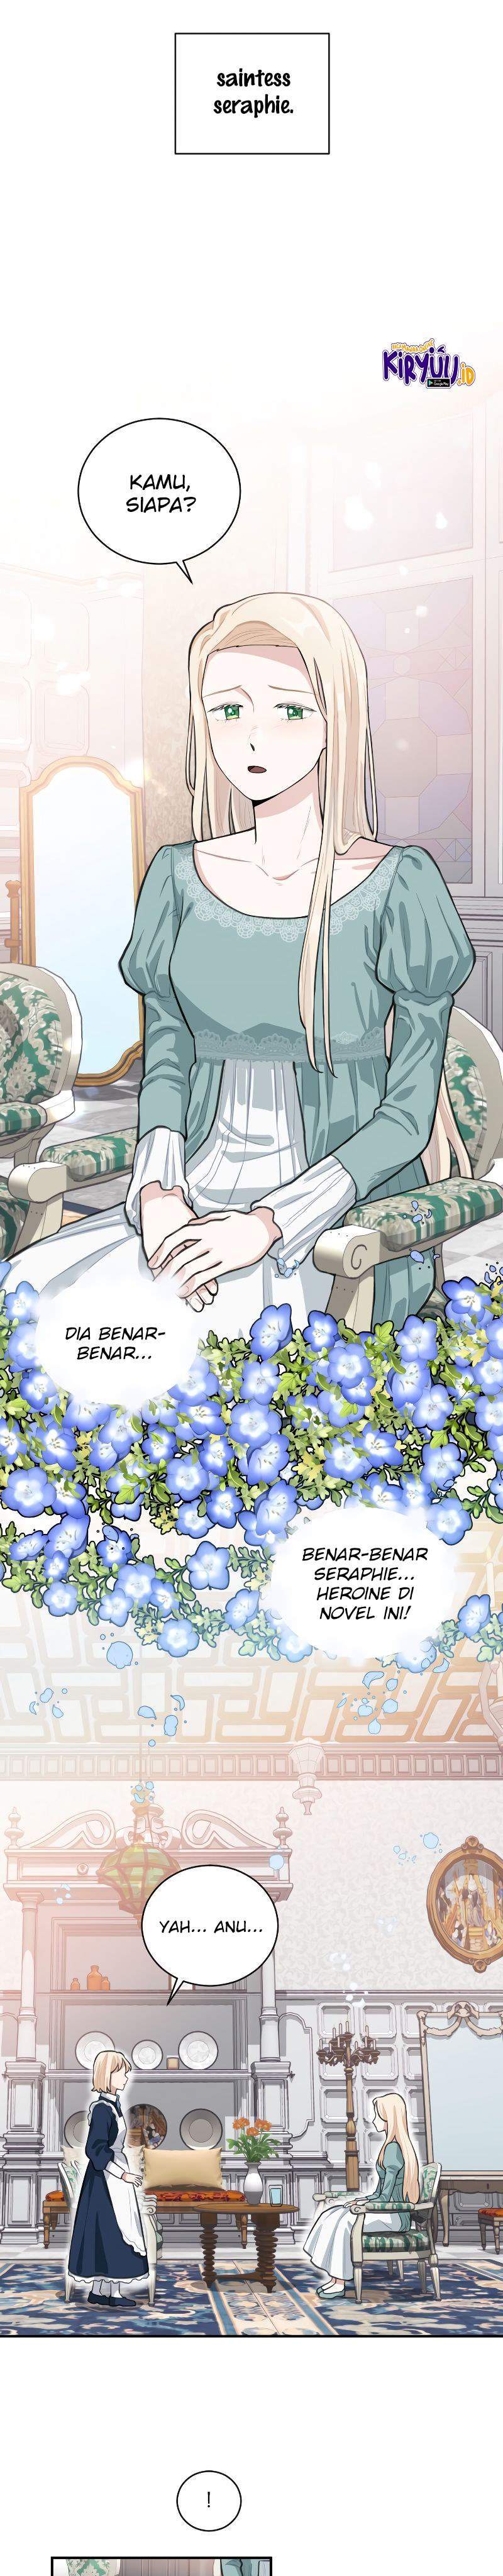 I Became a Maid in a TL Novel Chapter 3 19